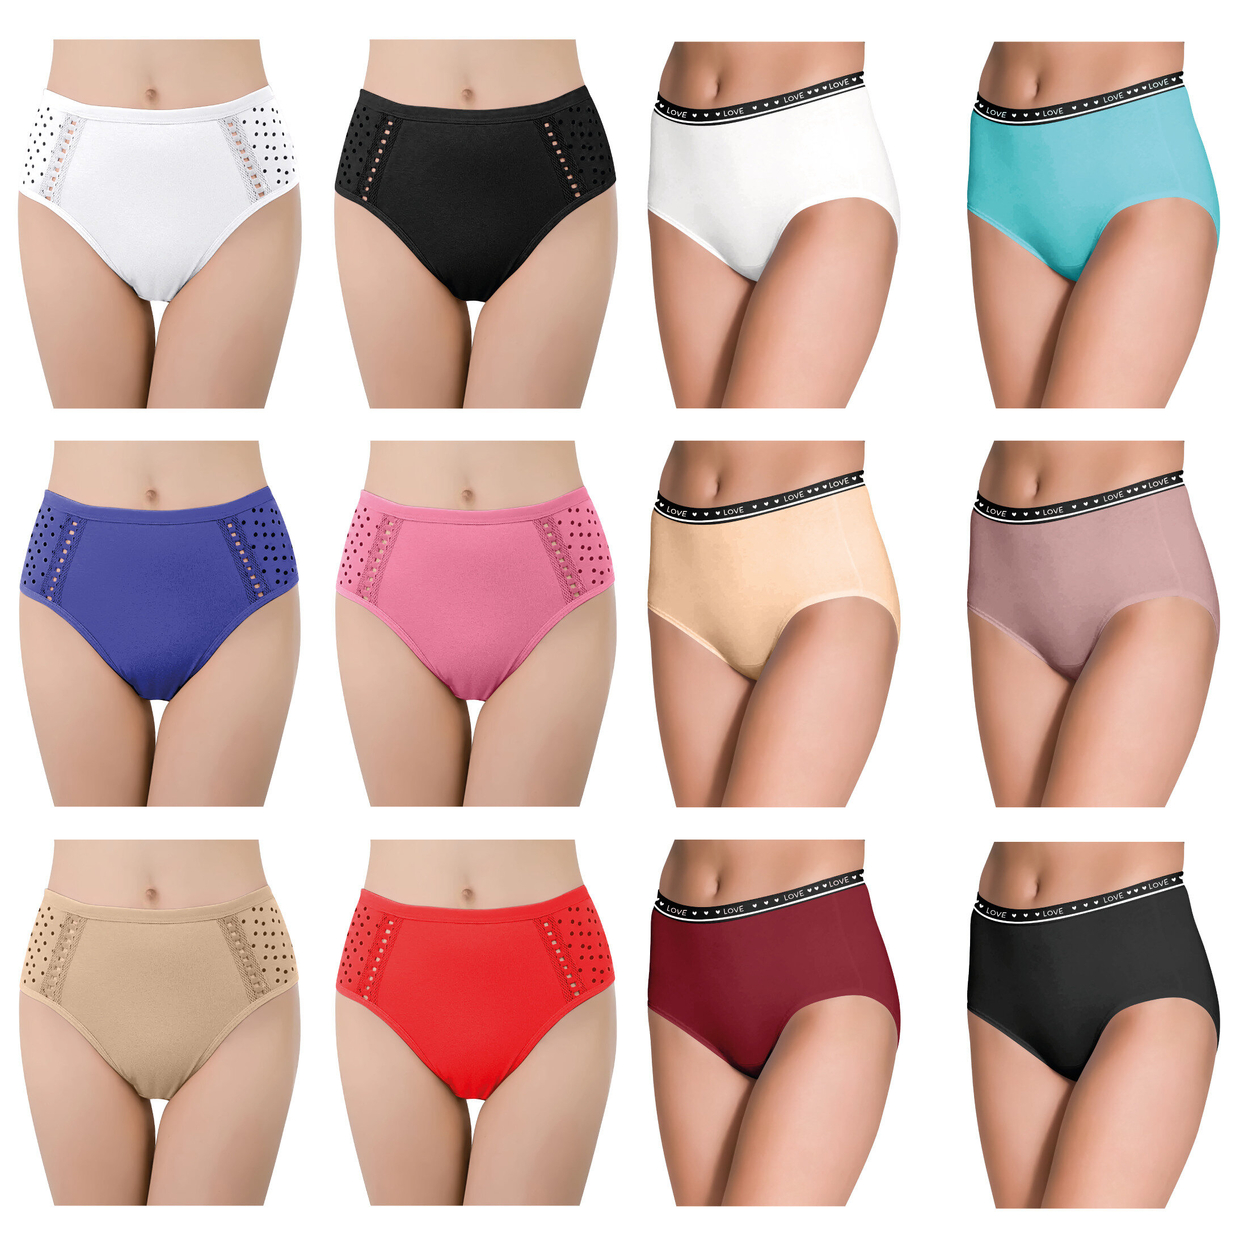 Multi-Pack: Women's Ultra Soft Moisture Wicking Panties Cotton Perfect Fit Underwear (Plus Sizes Available) - 12-Pack, Xx-large